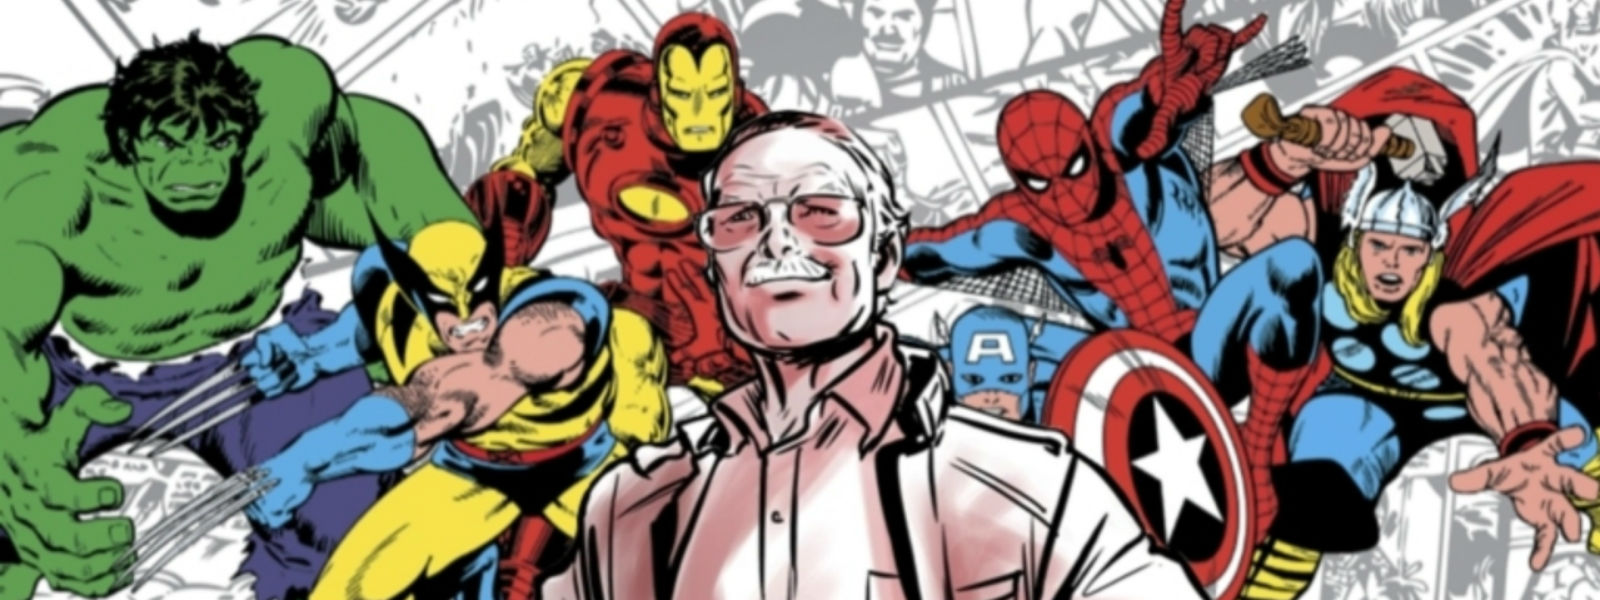 Stan Lee: The man, the legend and Father of Marvel